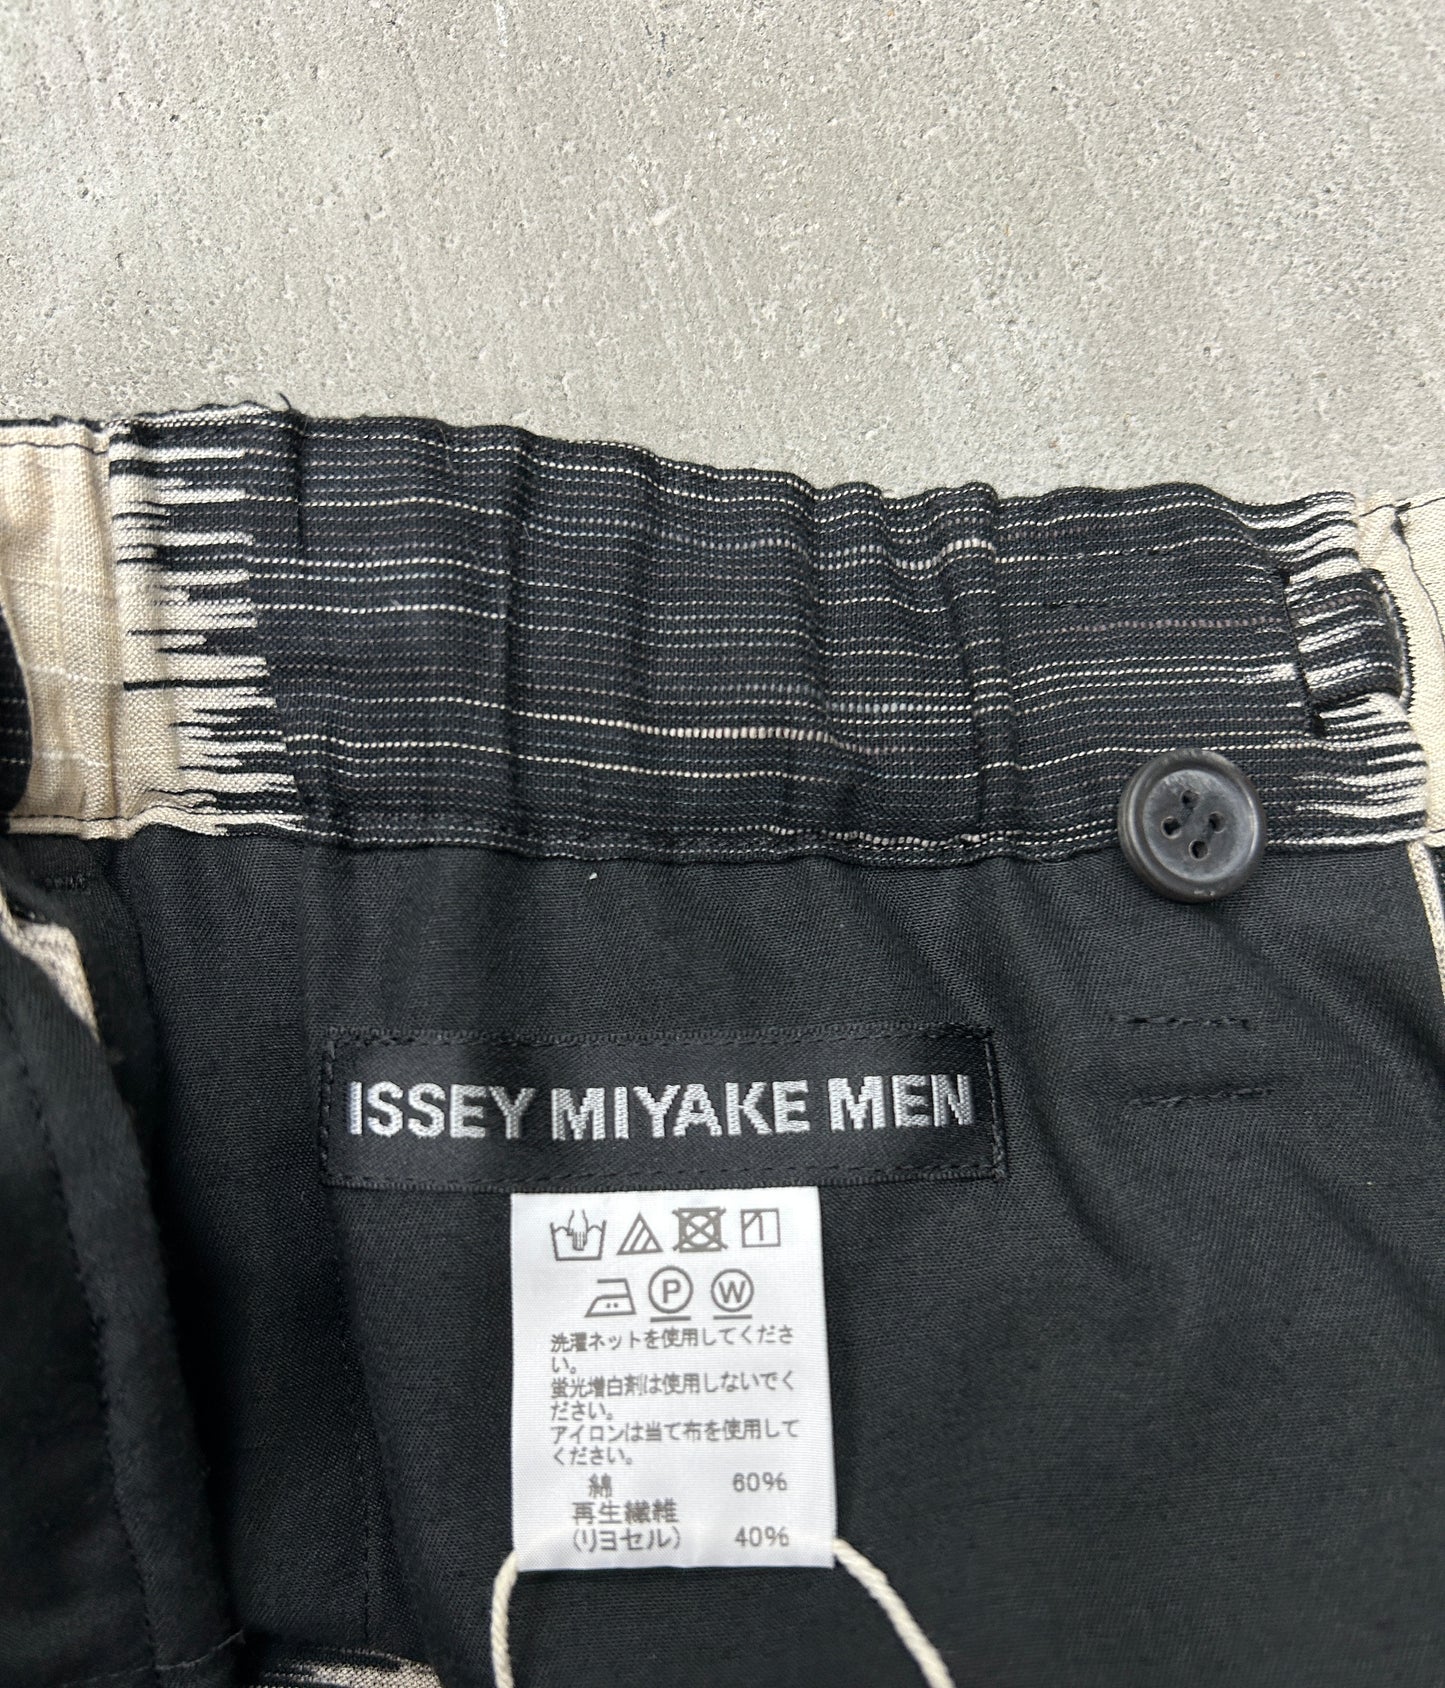 Issey Miyake Men AW2019 All-over Print Trouser-Size 1